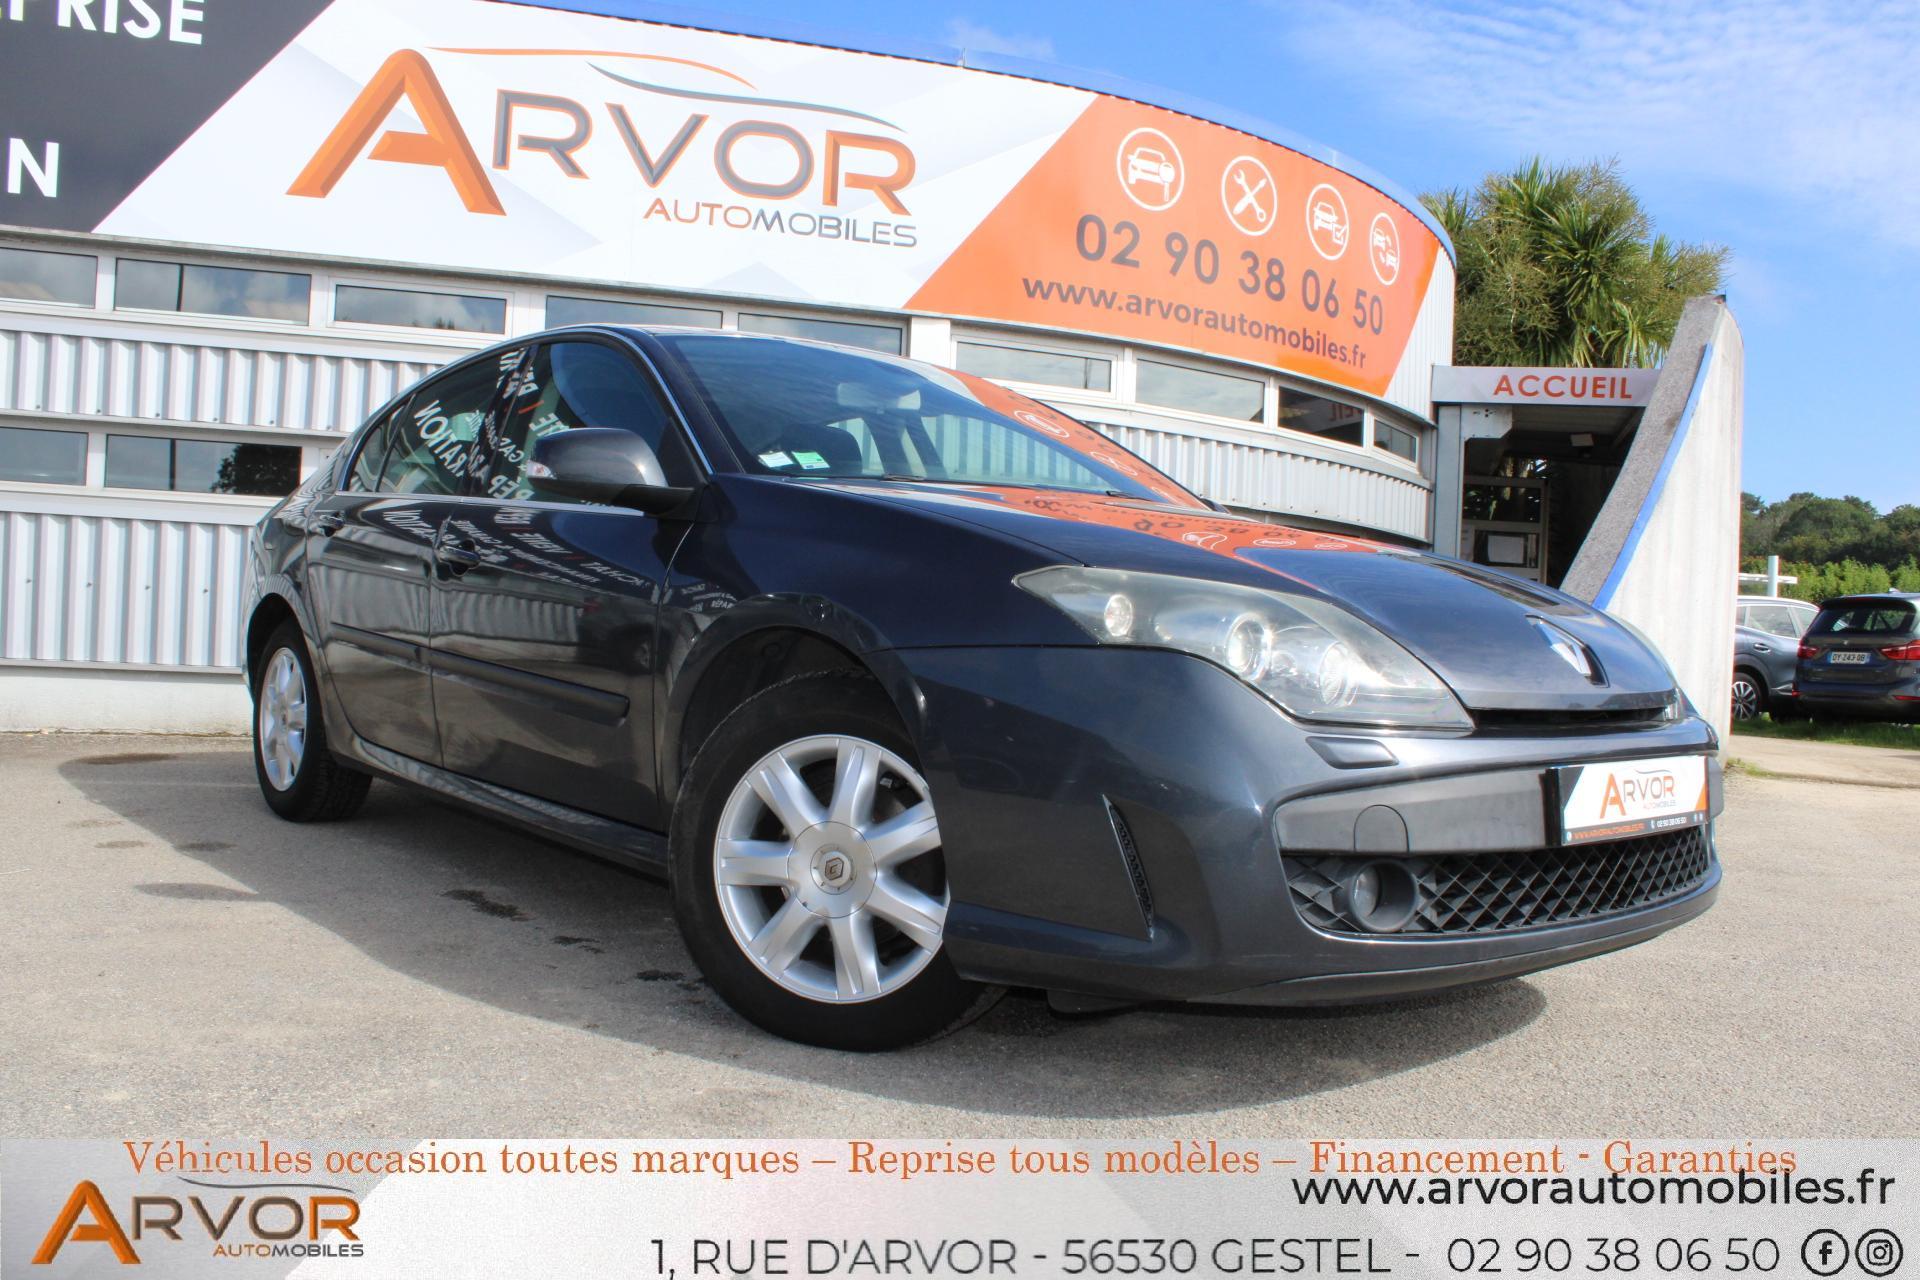 Annonce Renault laguna iii 1.5 dci 110 black edition 2011 DIESEL occasion -  Bernay - Eure 27